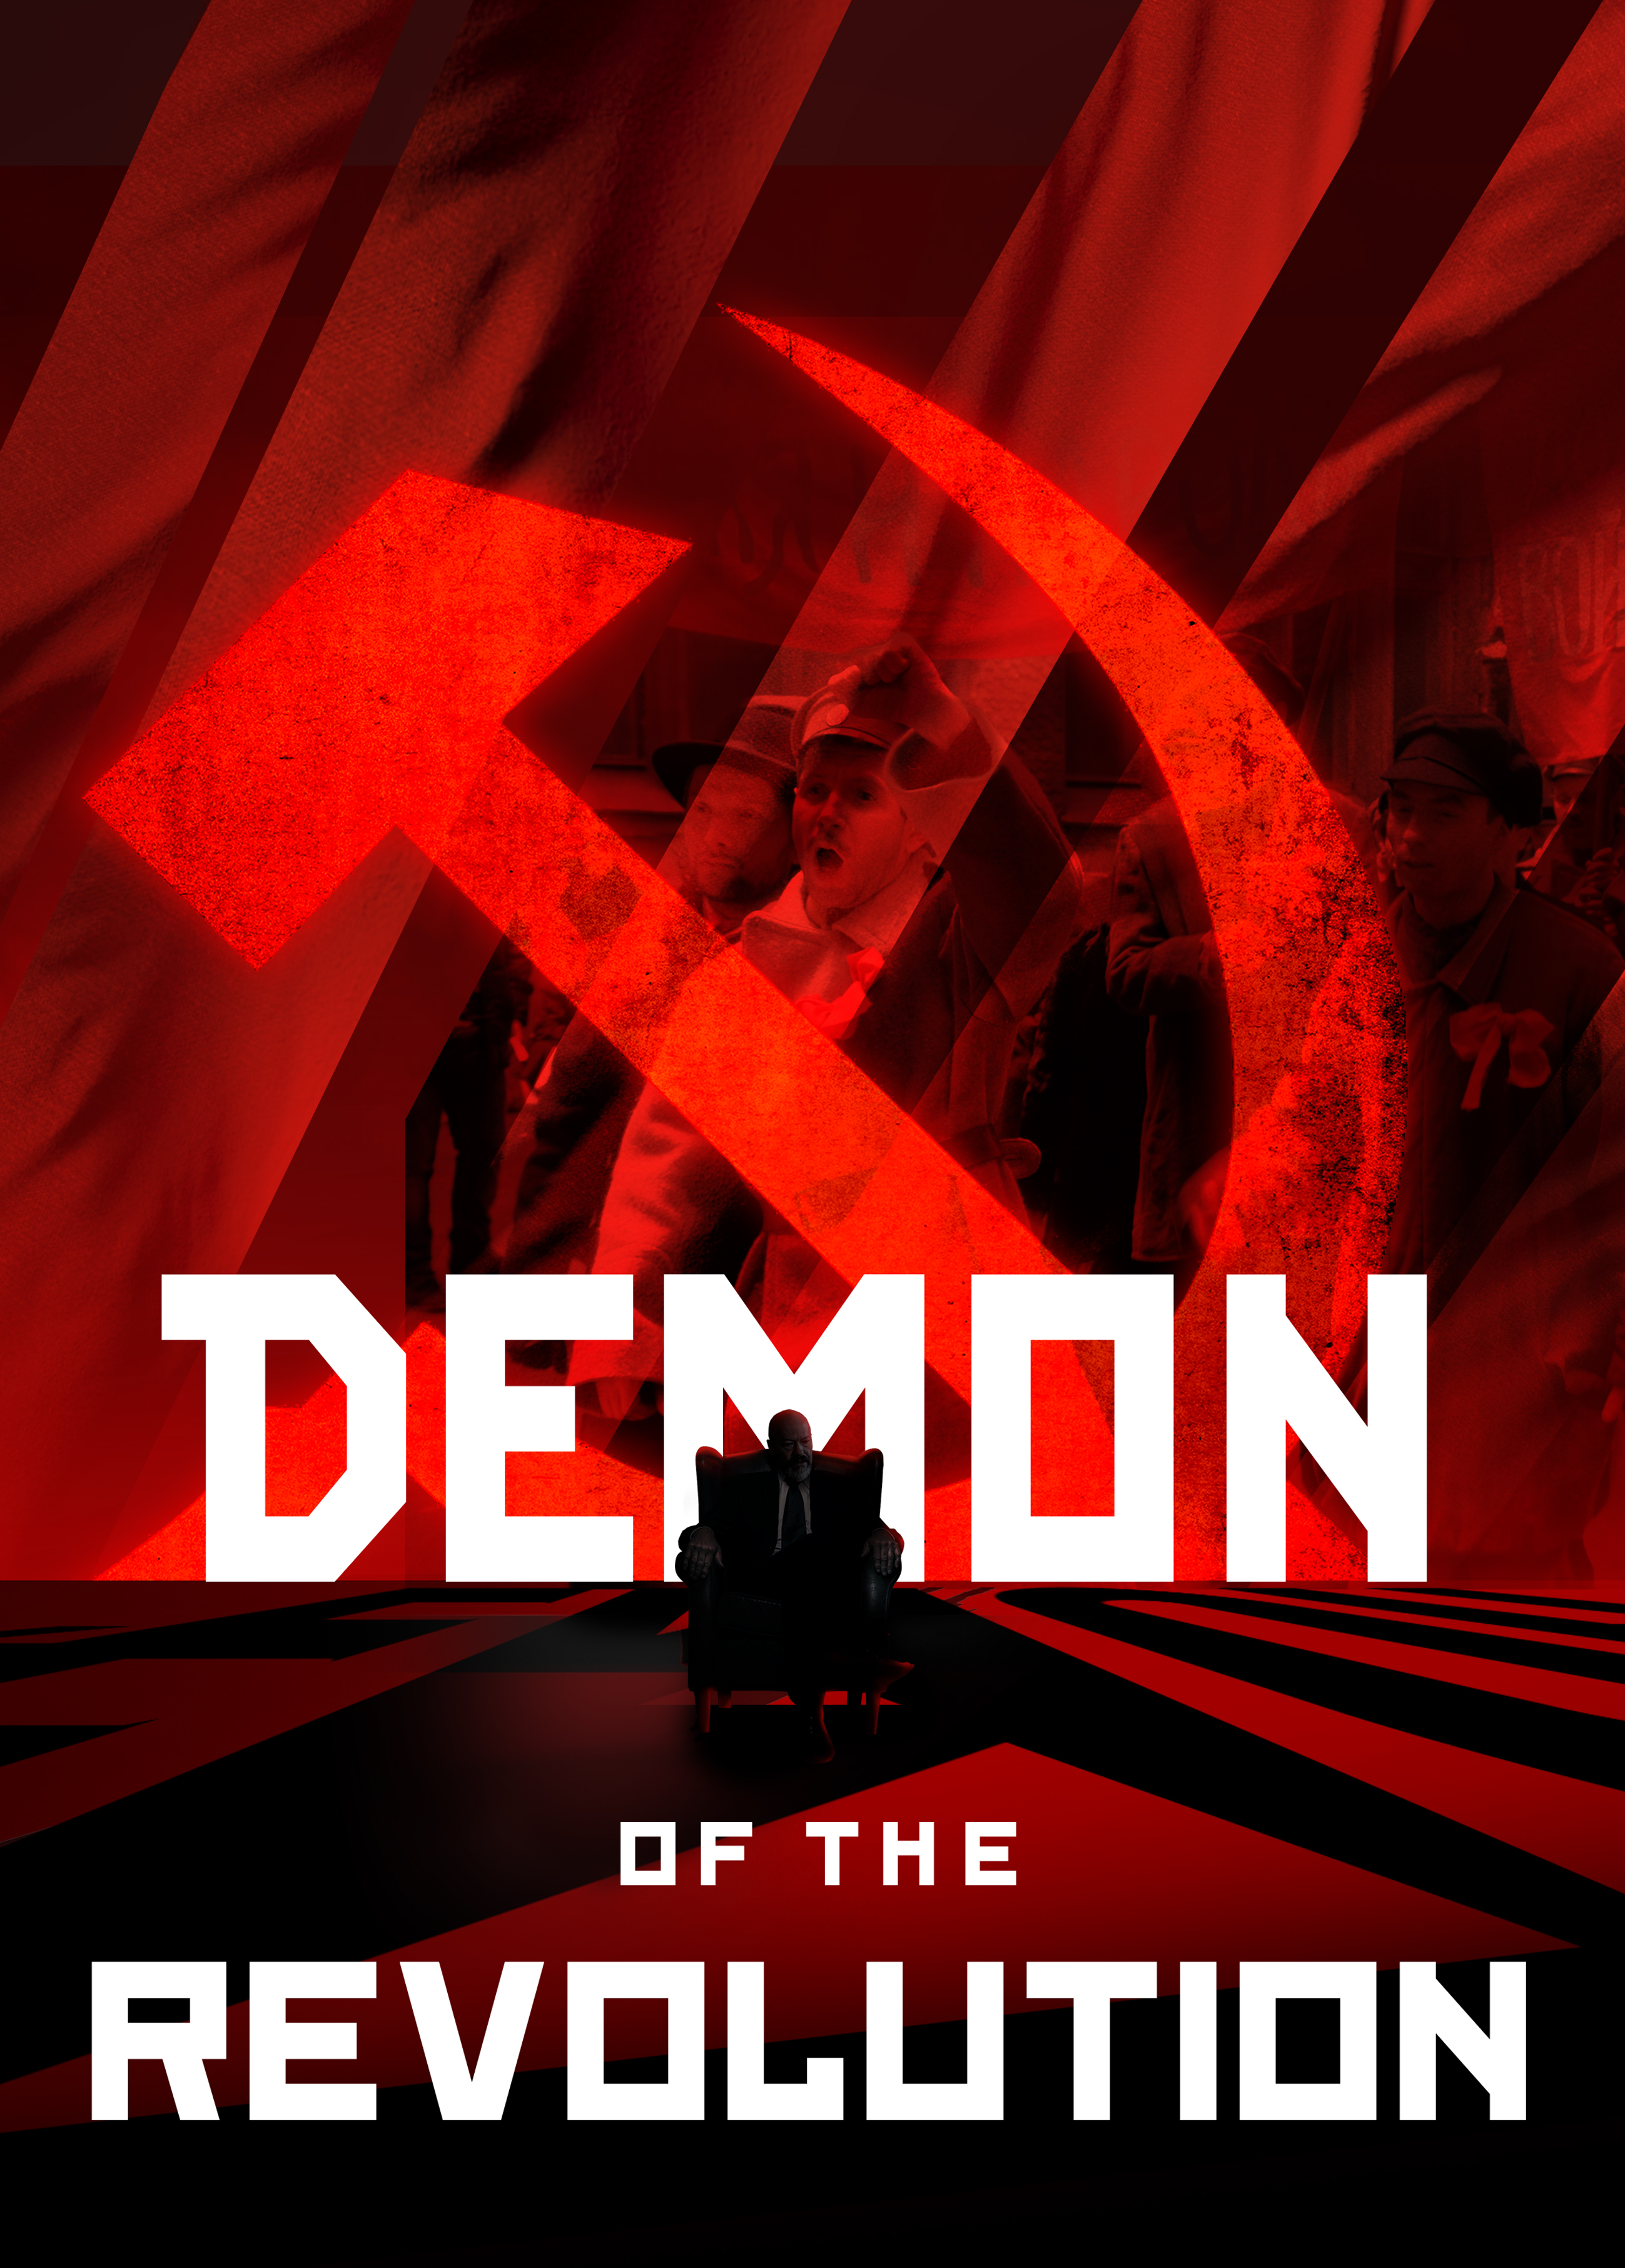 POLITICAL THRILLER DEMON OF THE REVOLUTION SOLD TO SOUTH KOREA